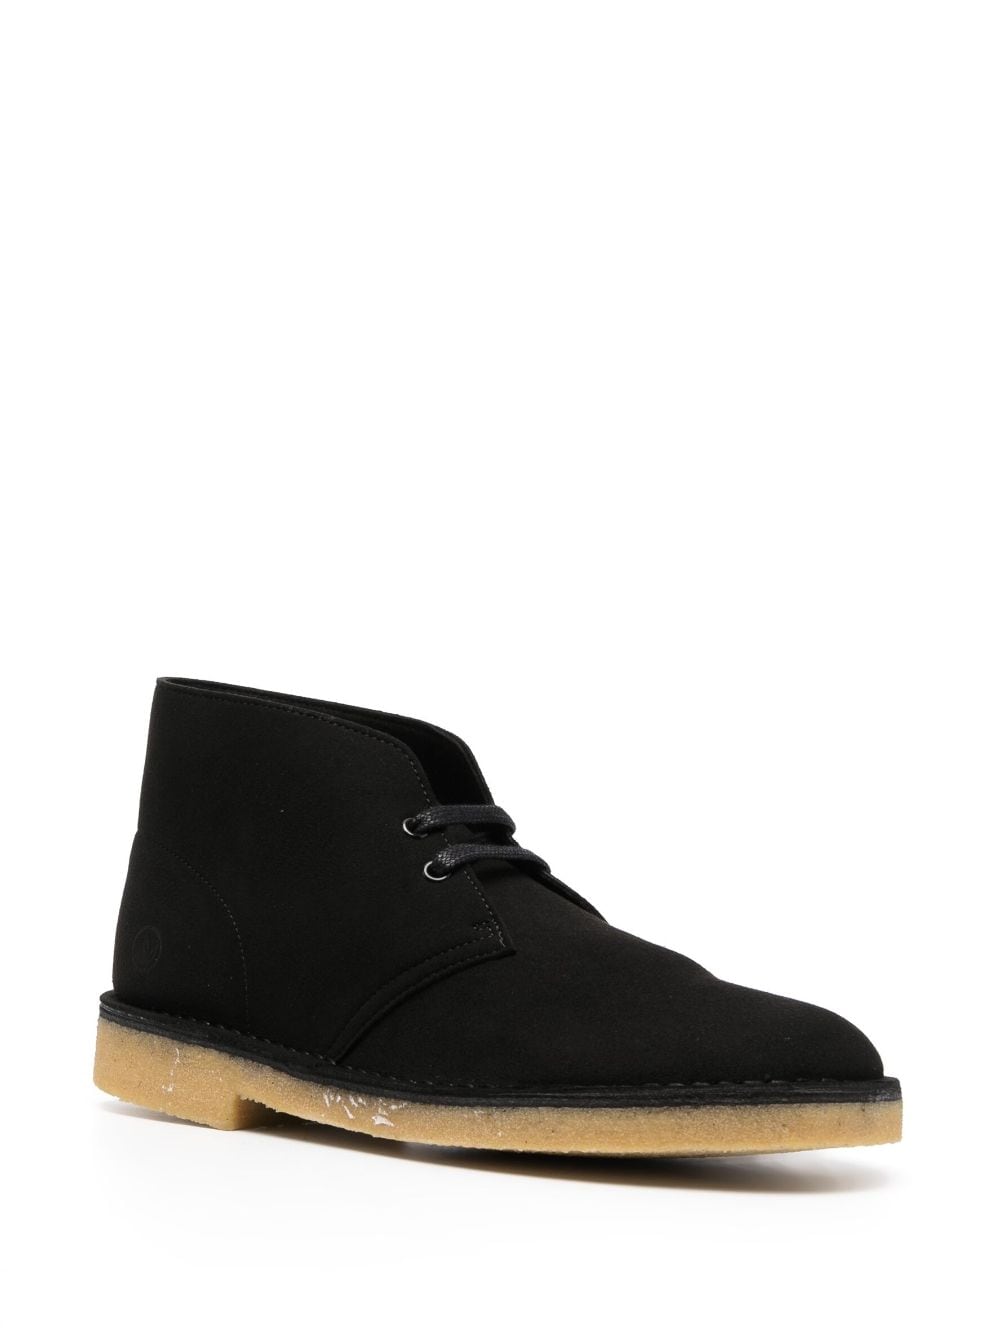 Image 2 of Clarks Originals Desert leather lace-up boots